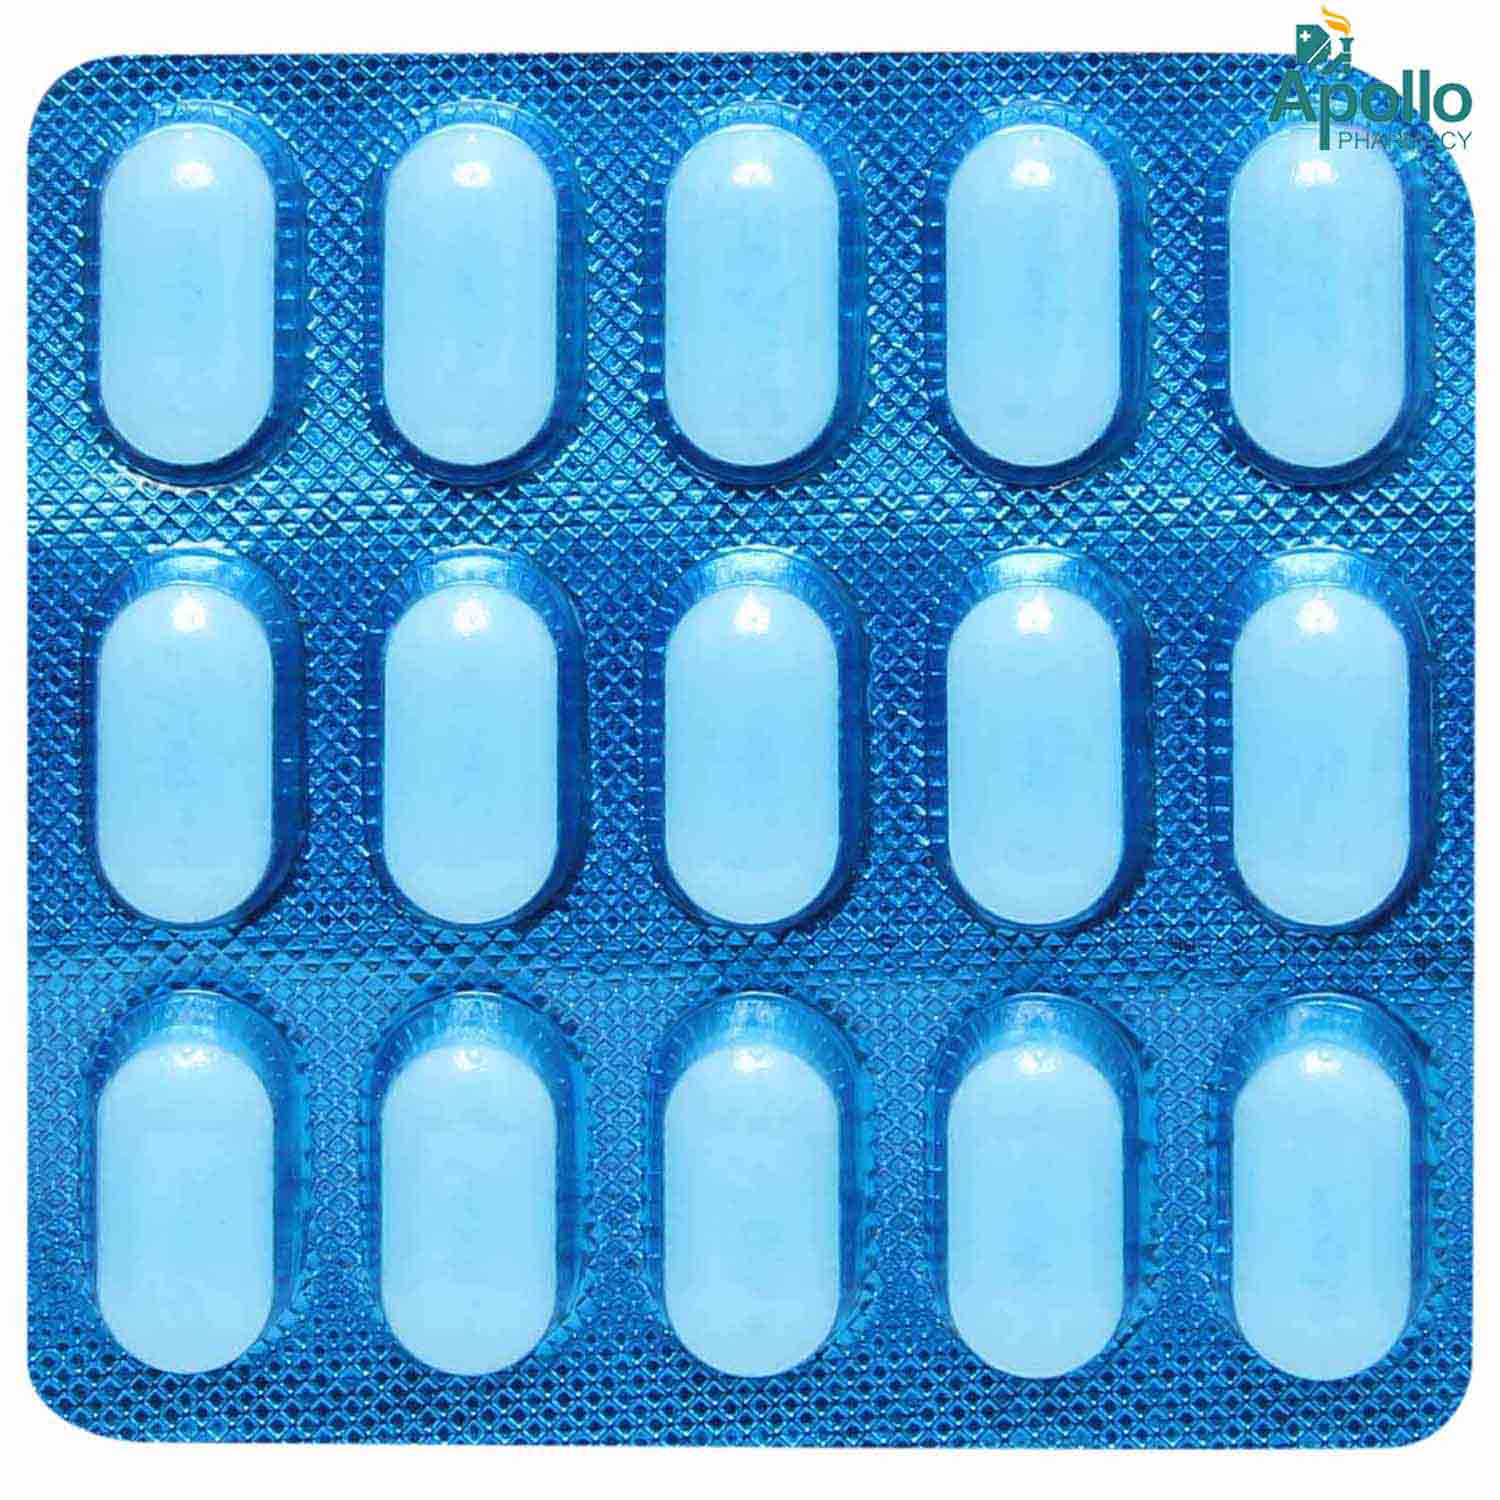 Pacimol 650 Tablet 15's, Pack of 15 TABLETS